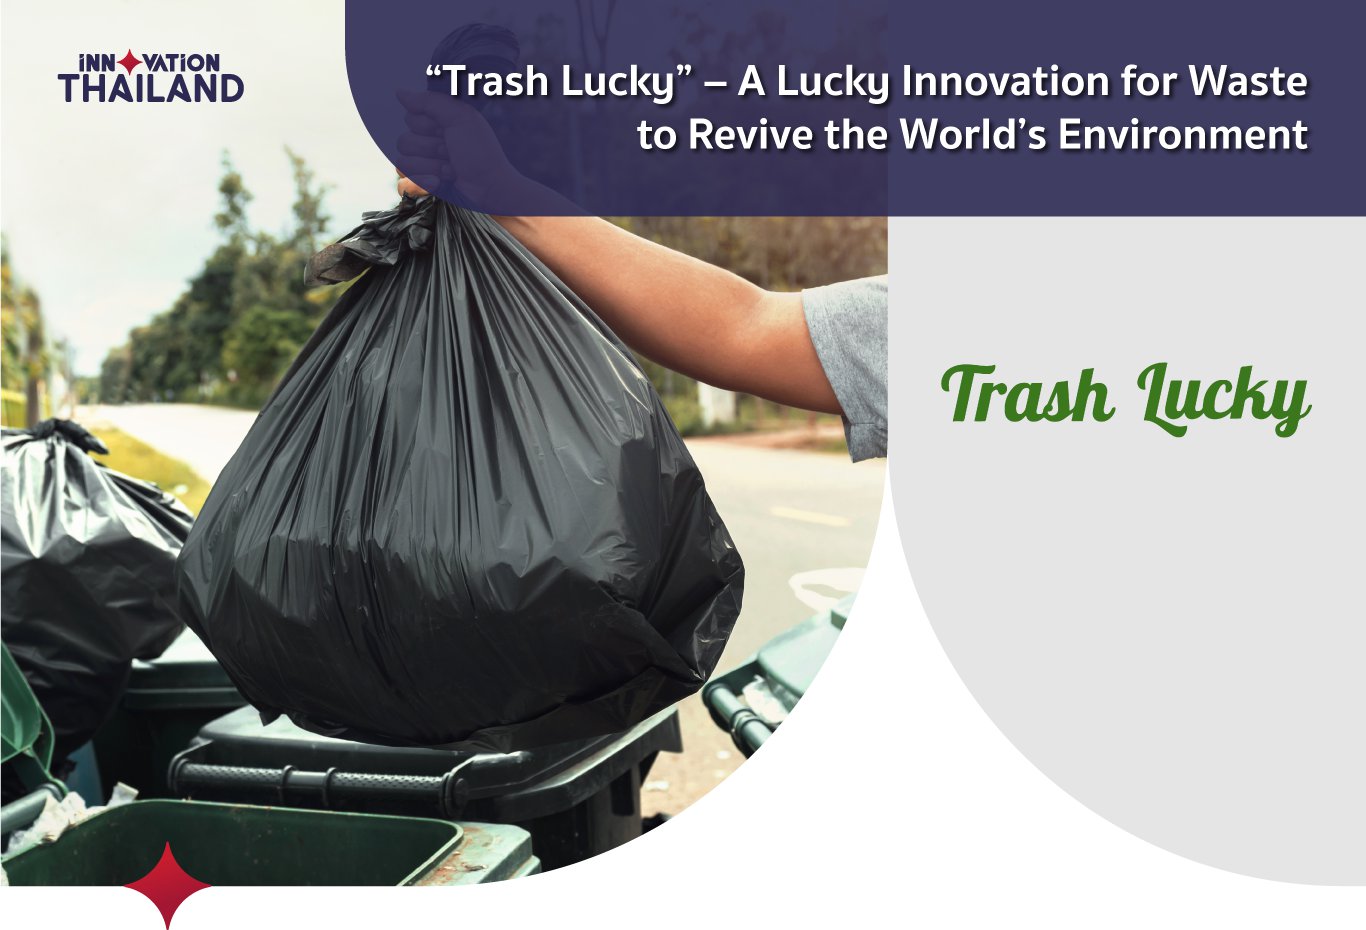 Trash Lucky A Lucky Innovation for Waste to Revive the World’s Environment